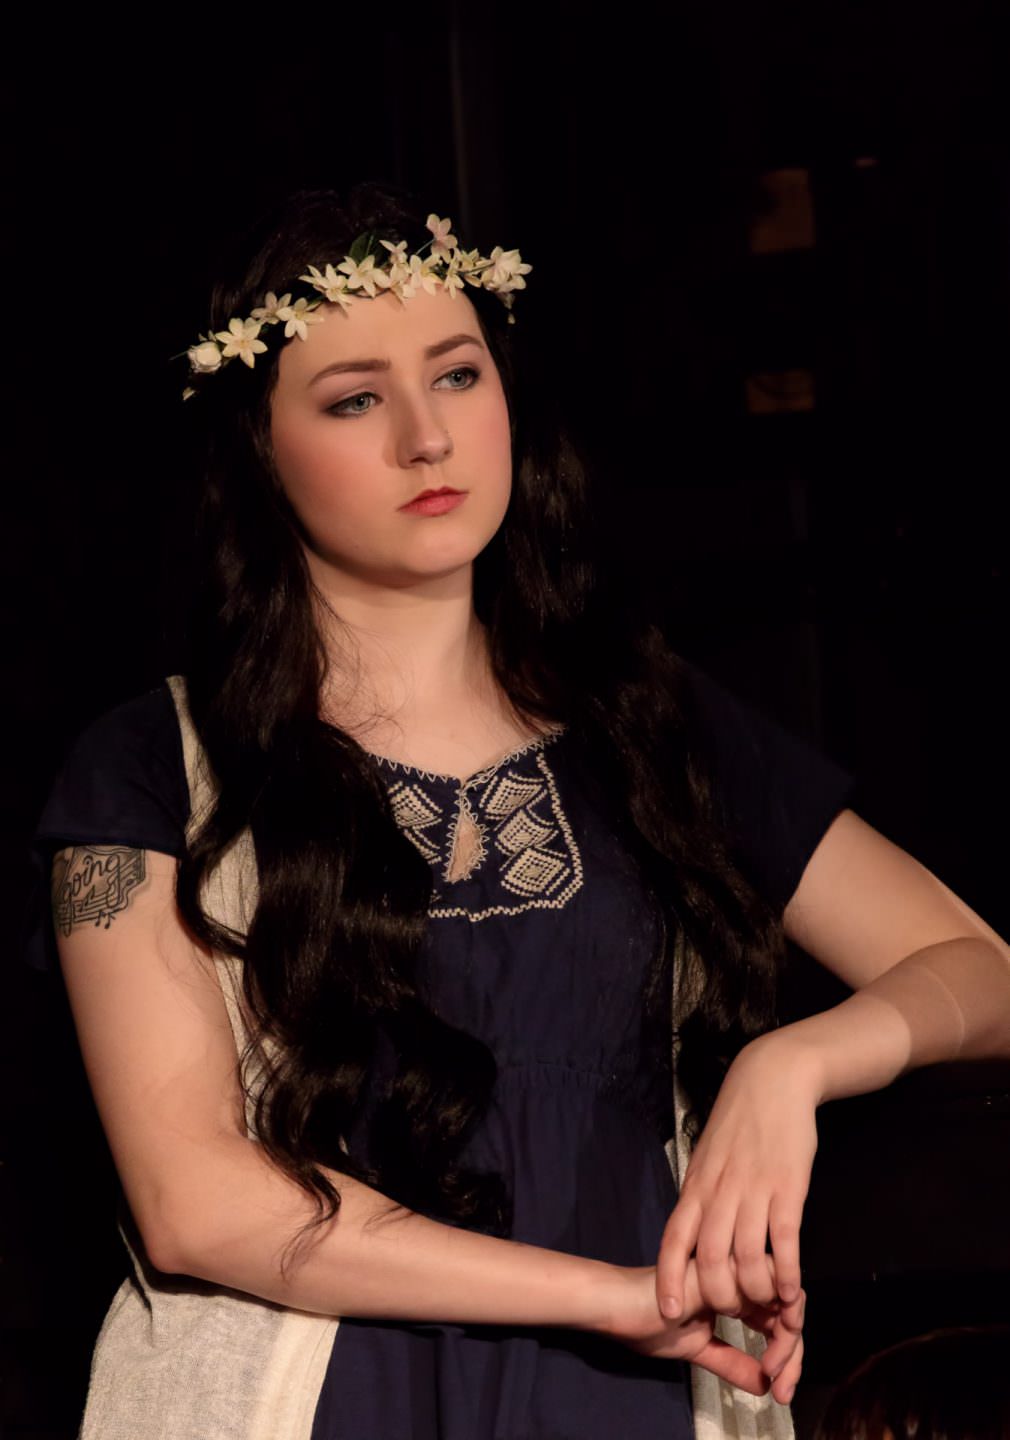 A beautiful young lady plays a flower child in the play Jesus Christ Superstar